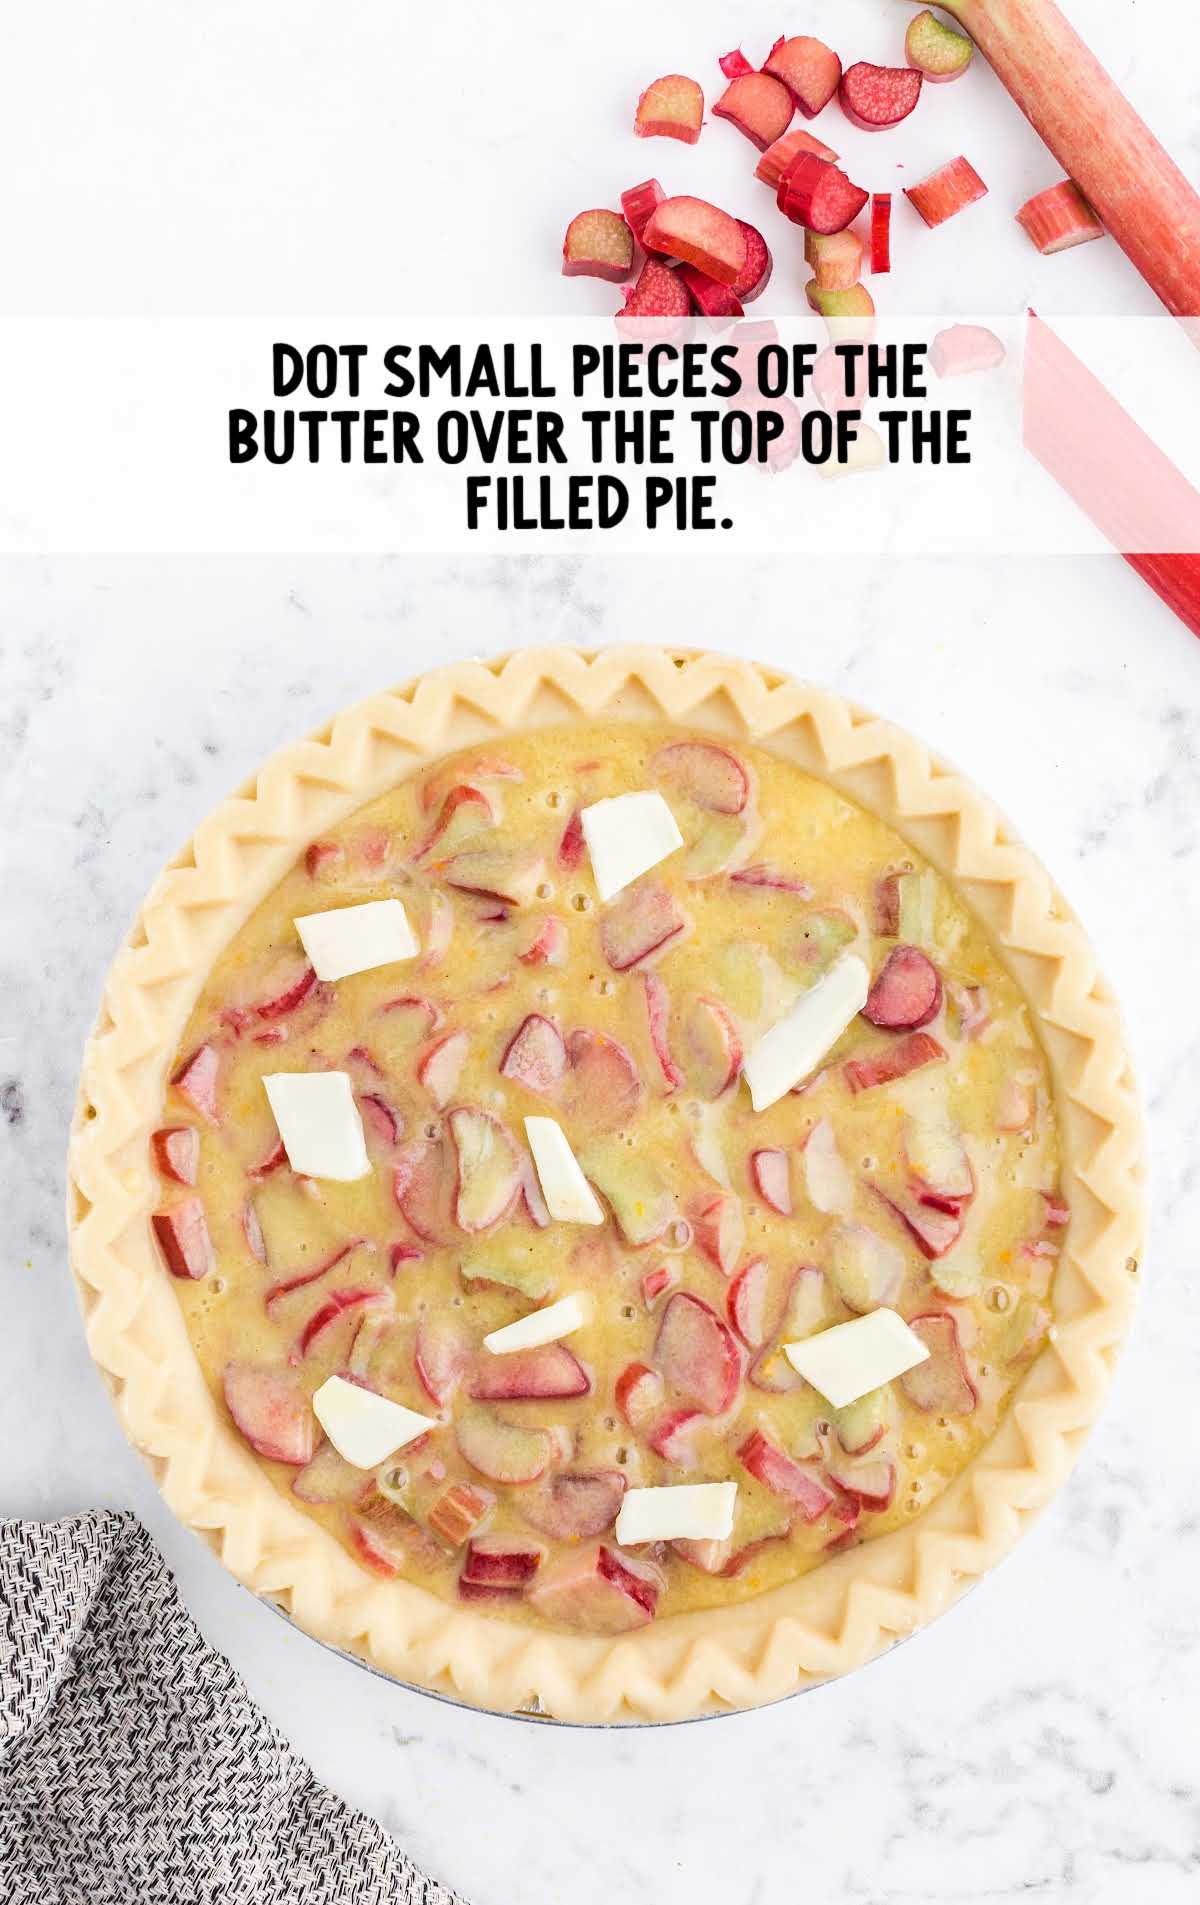 pieces of butter place on top of the pie